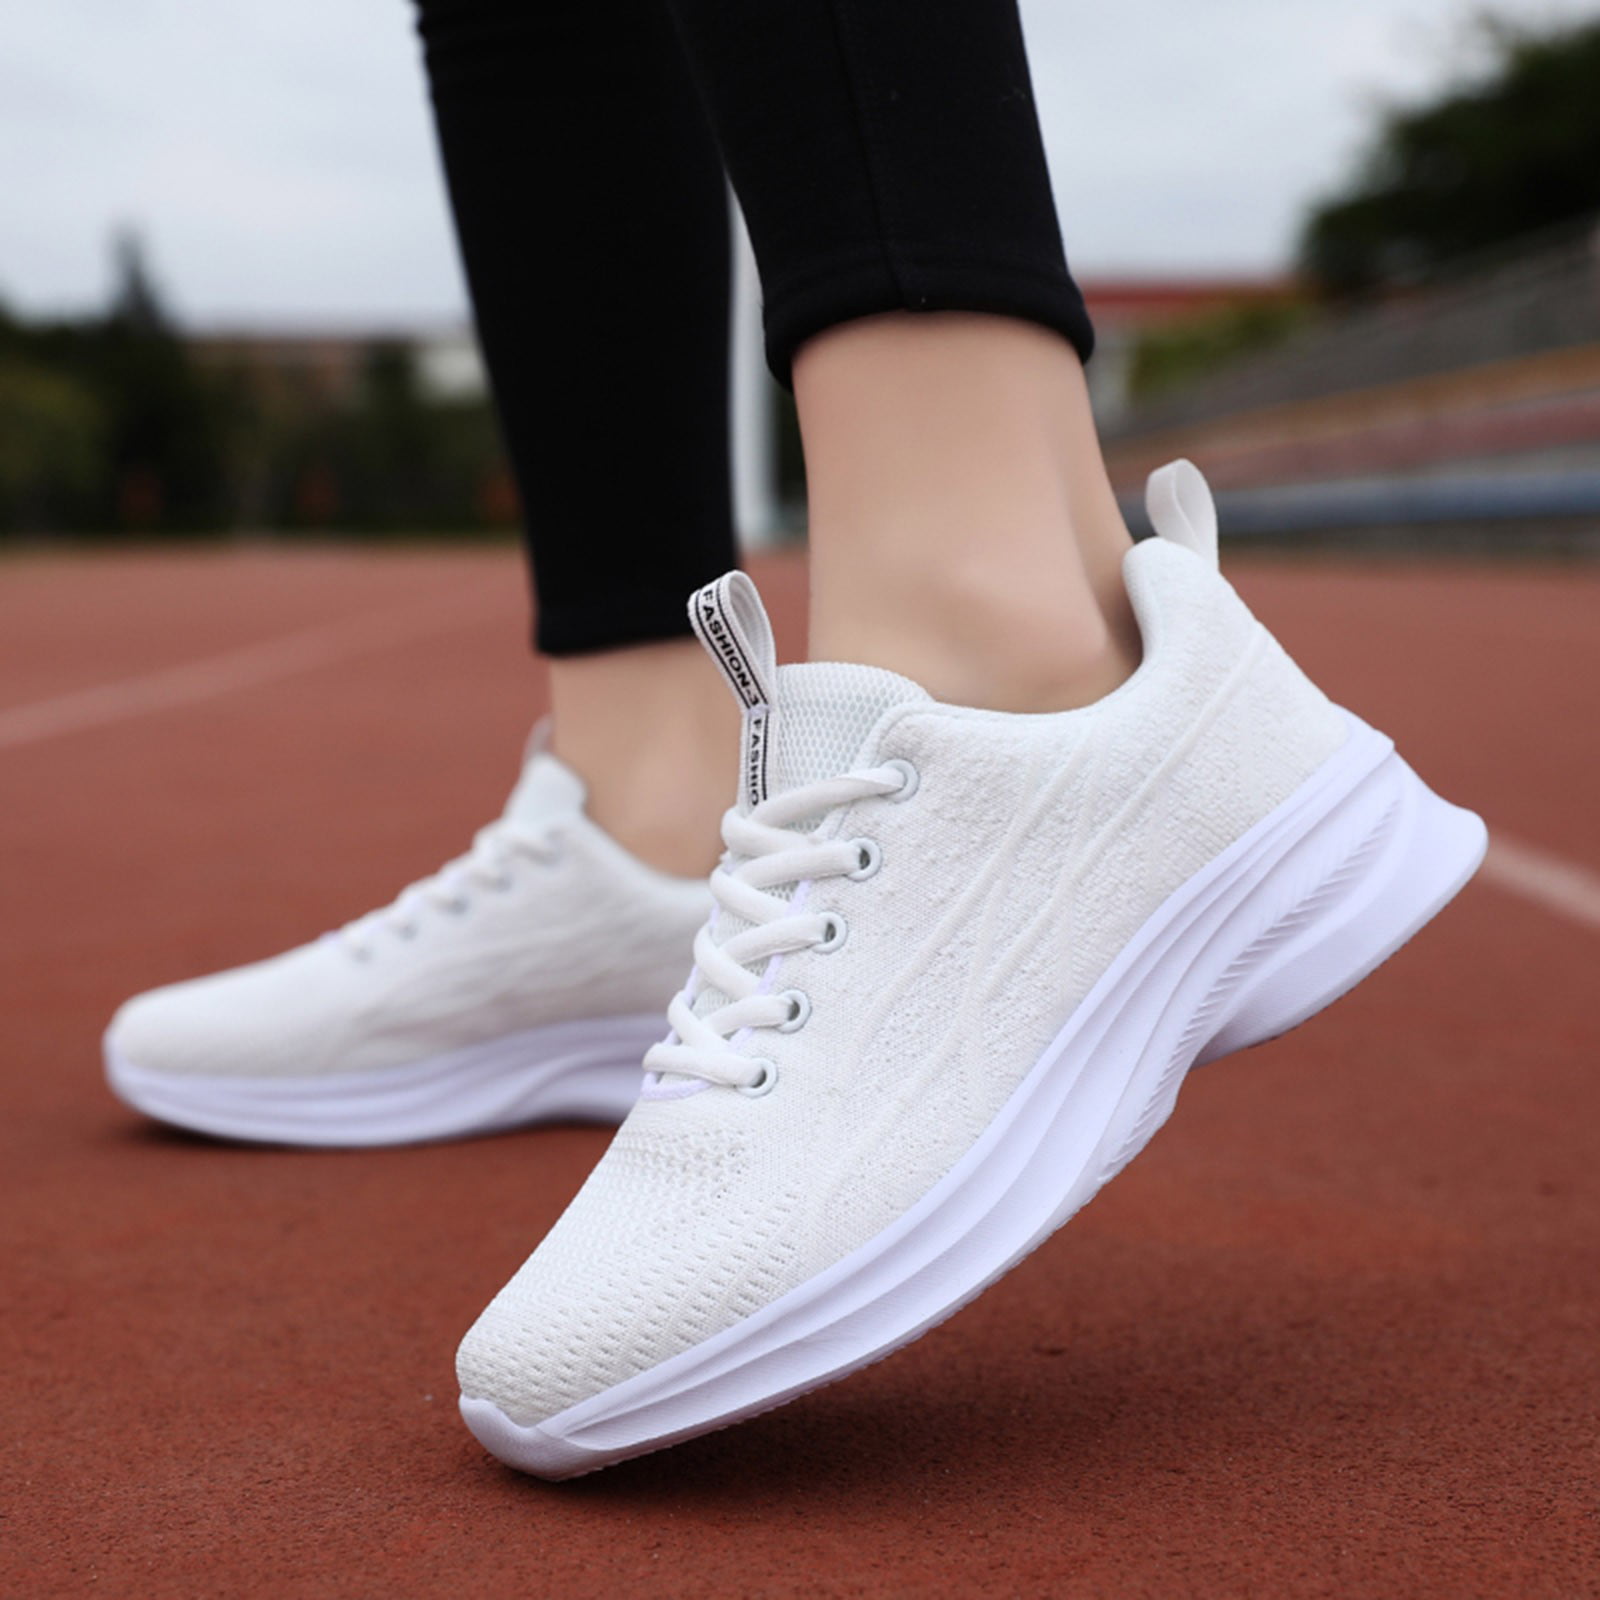 Gubotare Women Shoes Women Sneakers Lightweight Air Cushion Gym Fashion  Shoes Breathable Walking Running Athletic Sport,White  